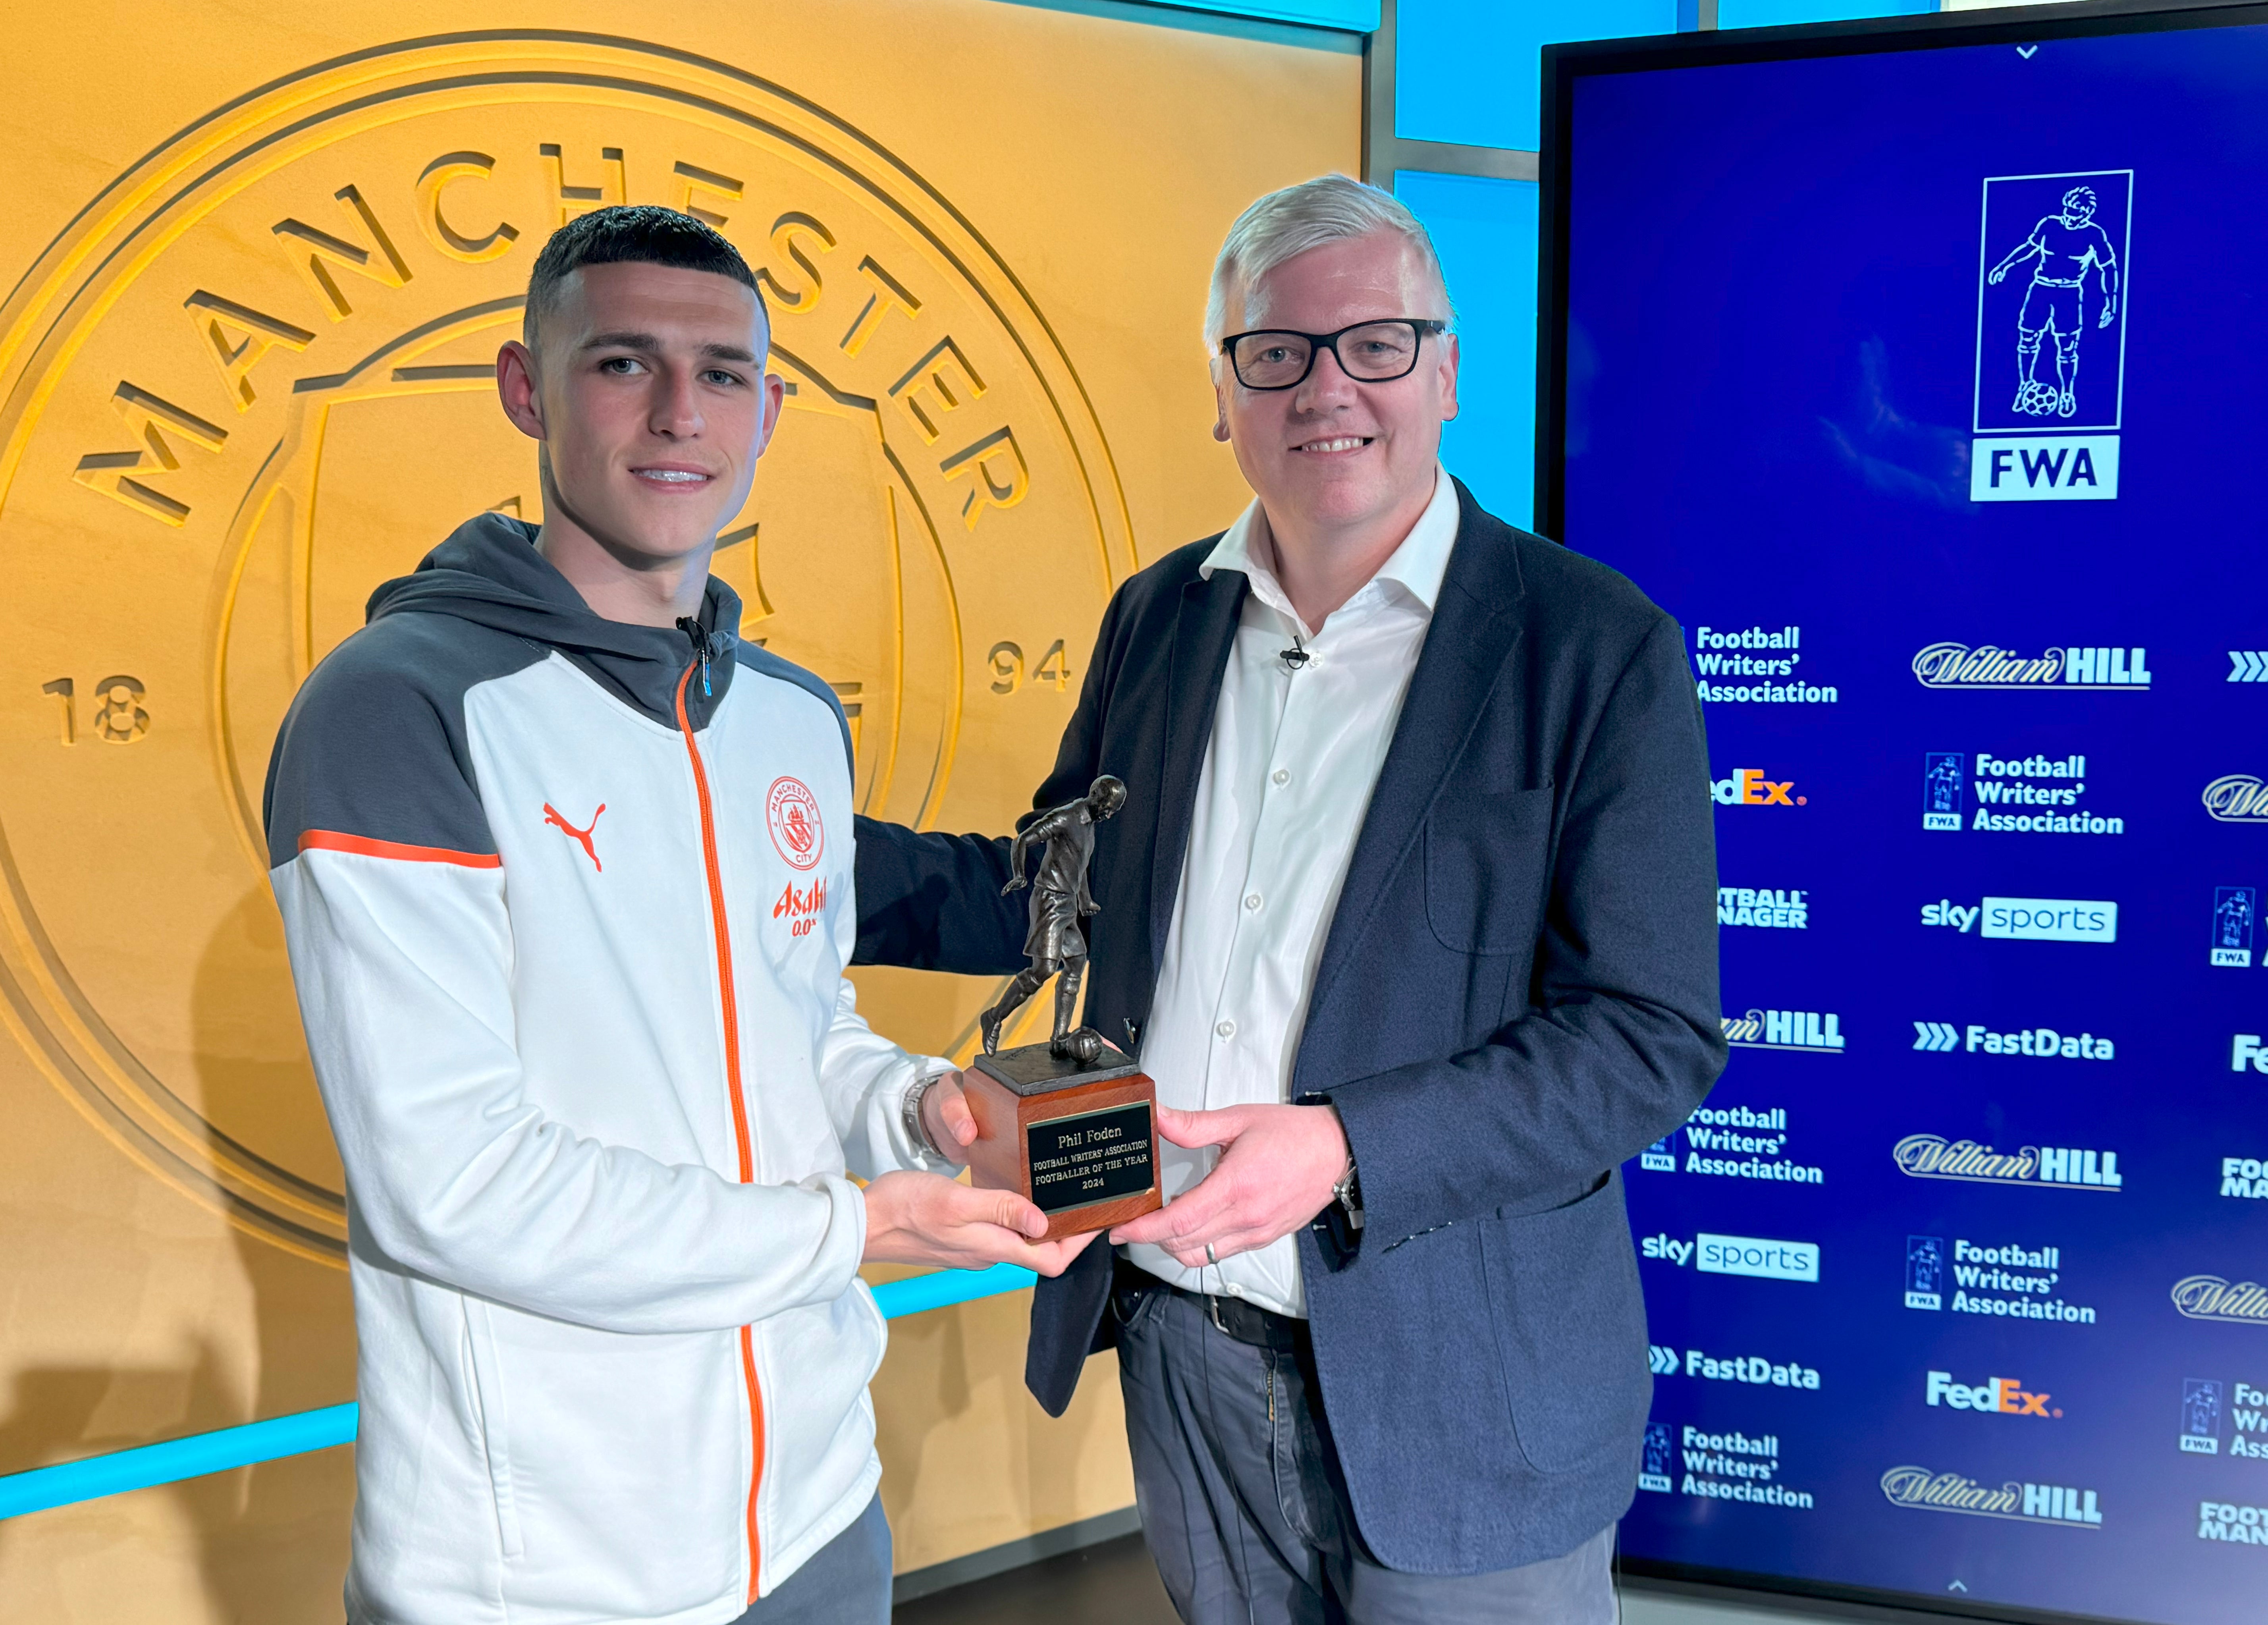 Phil Foden was presented his trophy by FWA Chair John Cross.